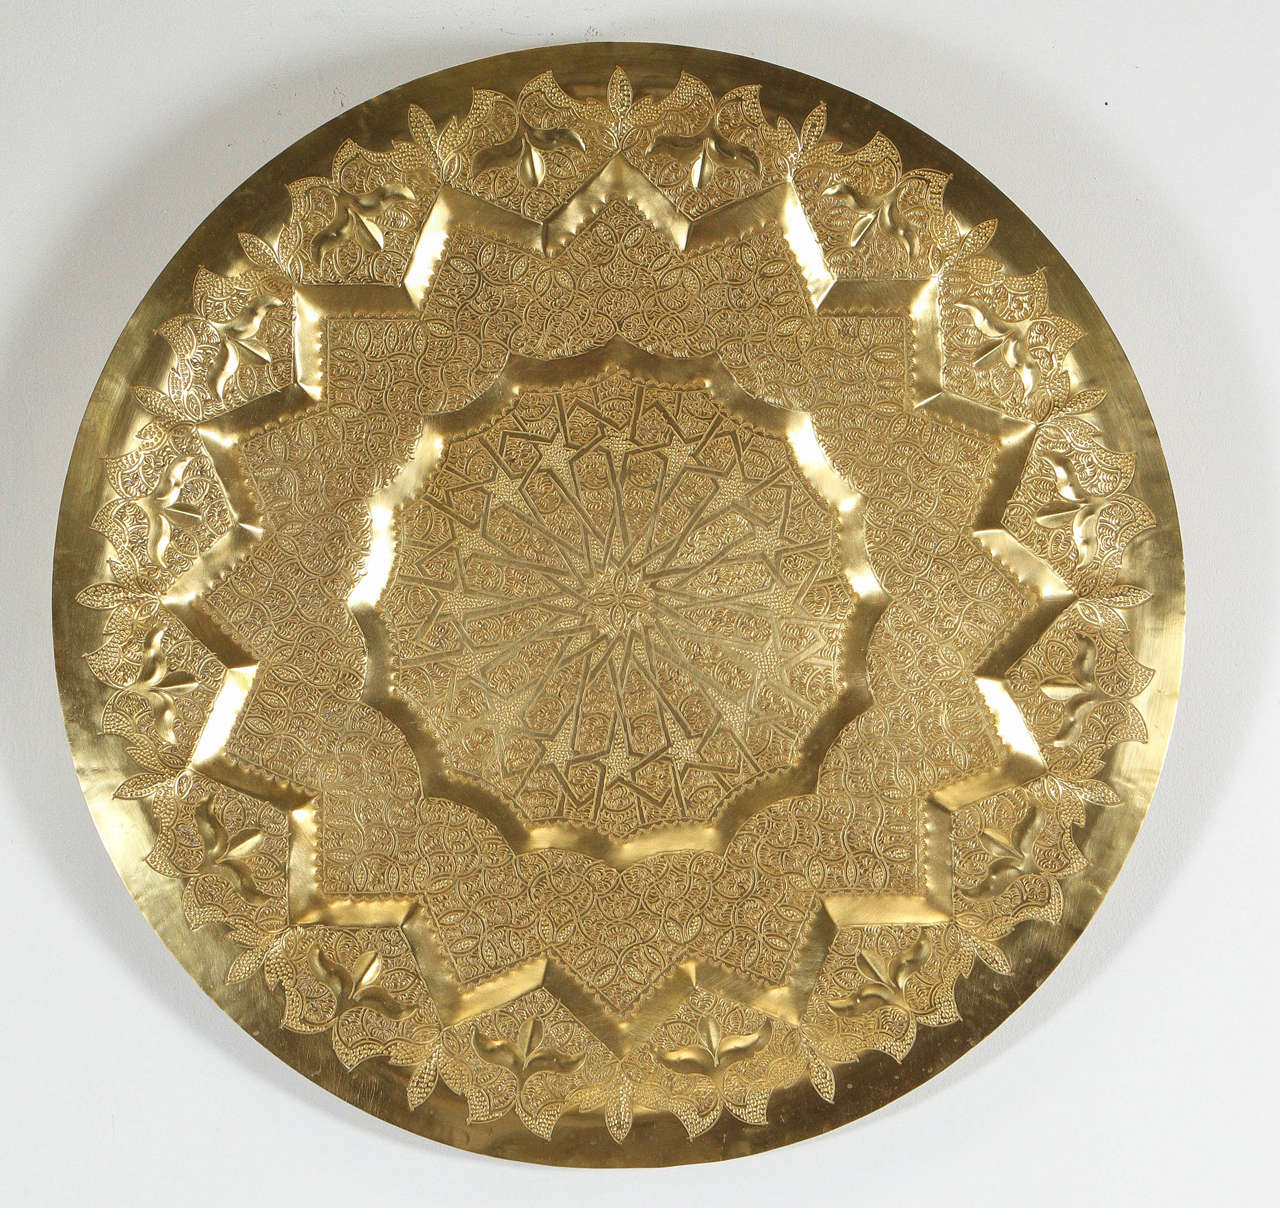 Fabulous Moroccan Moorish hand-hammered brass tray, intricate multi dimension artwork, very fine Anglo Raj brass repousse designs.
Handcrafted wall hanging decorative brass tray with a copper hook in the back.
Fabulous hand-etched wall hanging brass